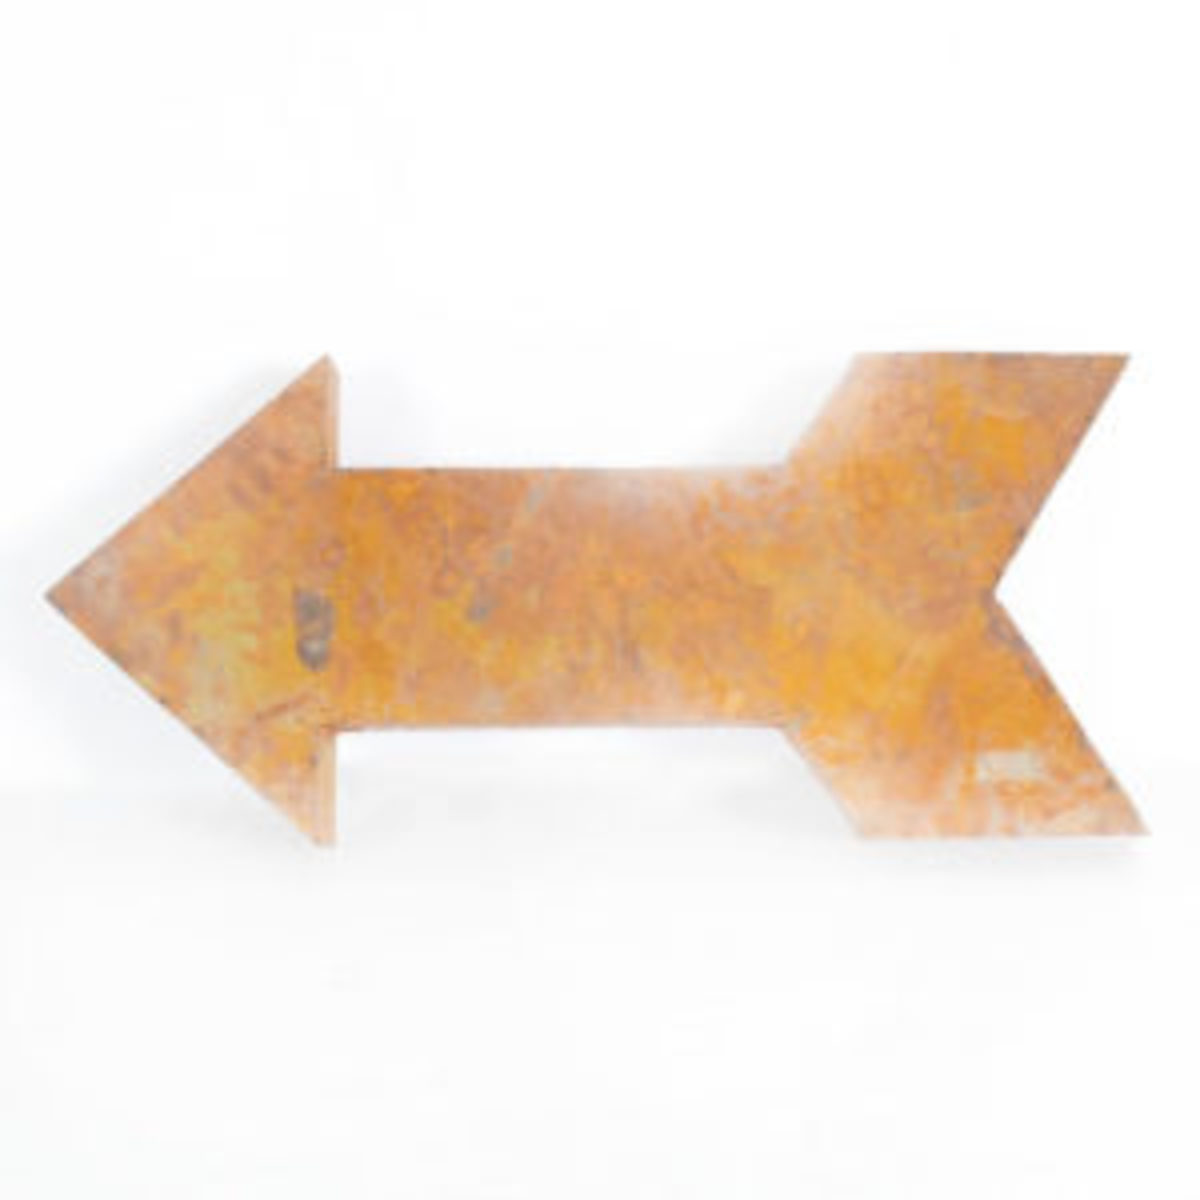 A hollow sheet metal arrow, originally a sign piece, with rusty patina consistent with long-term outside use, $112.